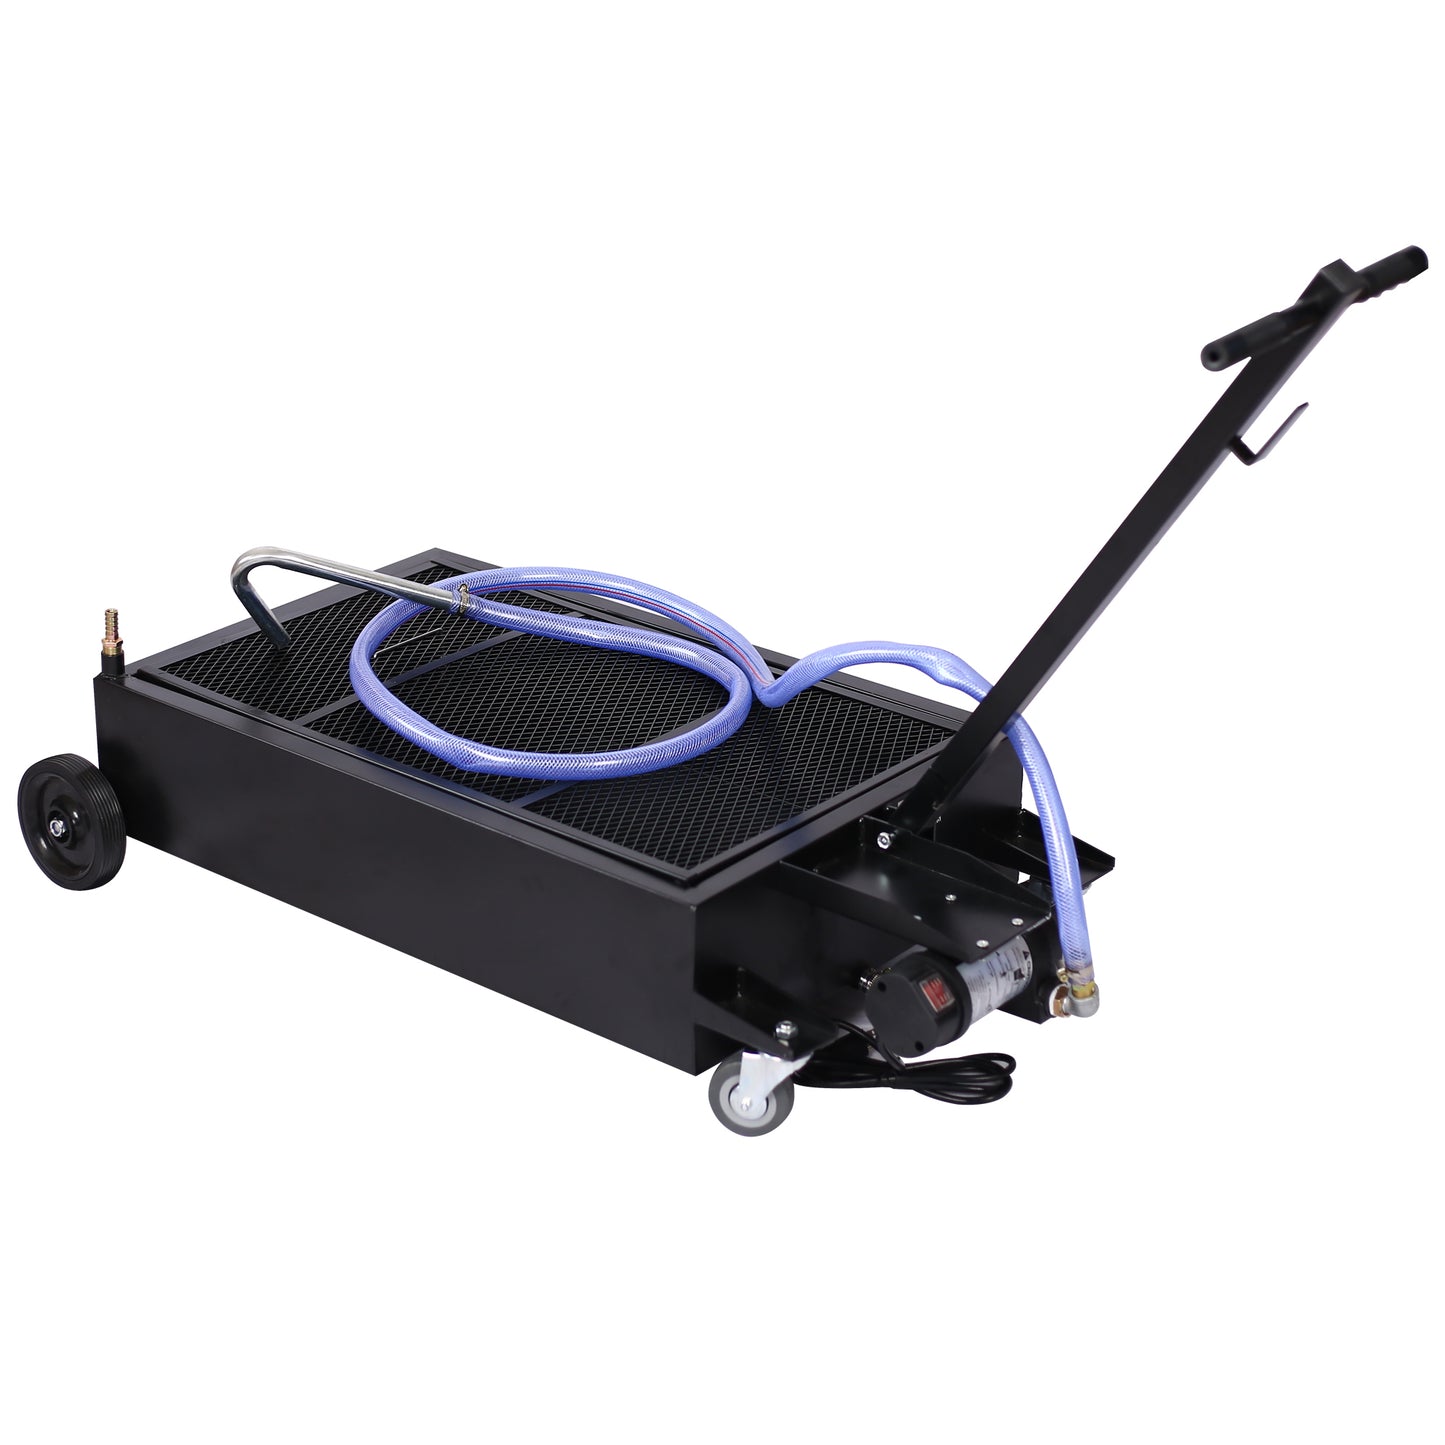 25 gallon low profile oil drainer ,with electric pump